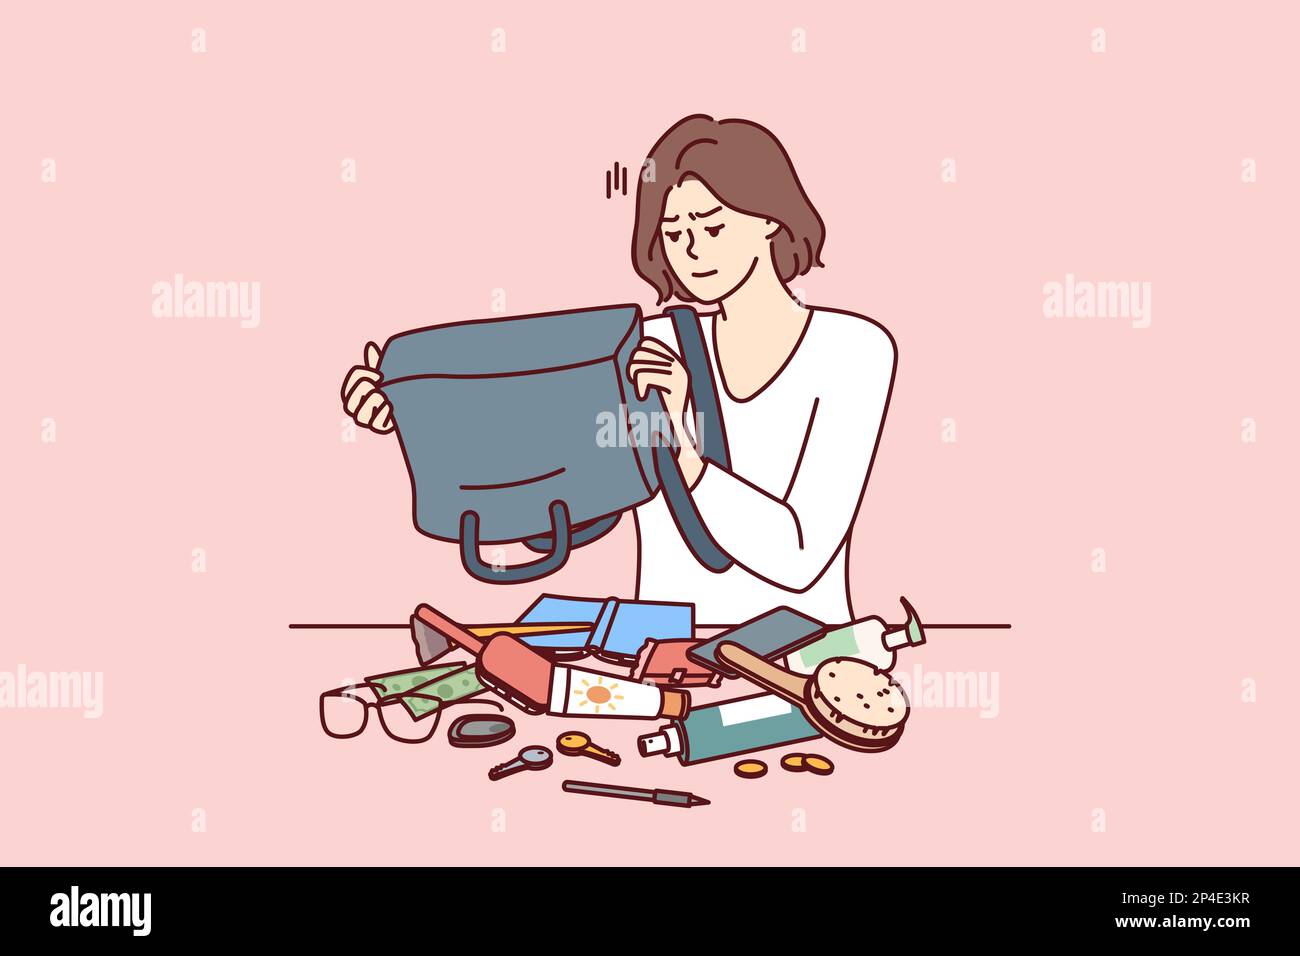 Puzzled woman shakes out contents of bag on table trying to find wallet with money or mobile phone. Girl is embarrassed because of mess in bag causing inconvenience and loss of wallet Stock Vector